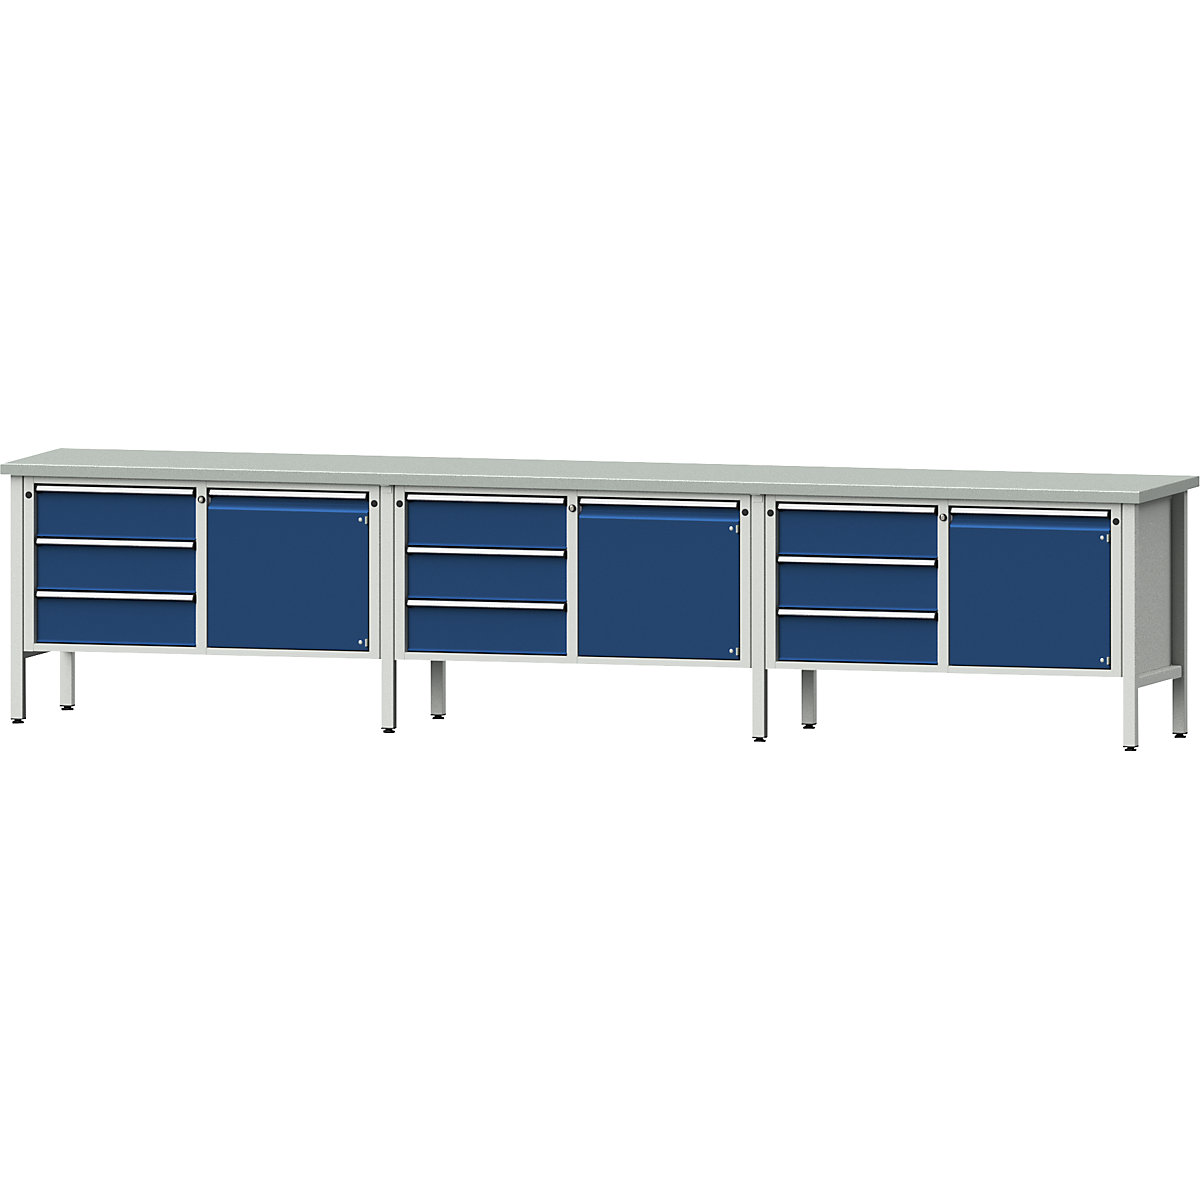 Workbench extra wide, frame construction – ANKE, 3 doors, 9 drawers are fully extendable, working height 890 mm, sheet steel covered worktop-7